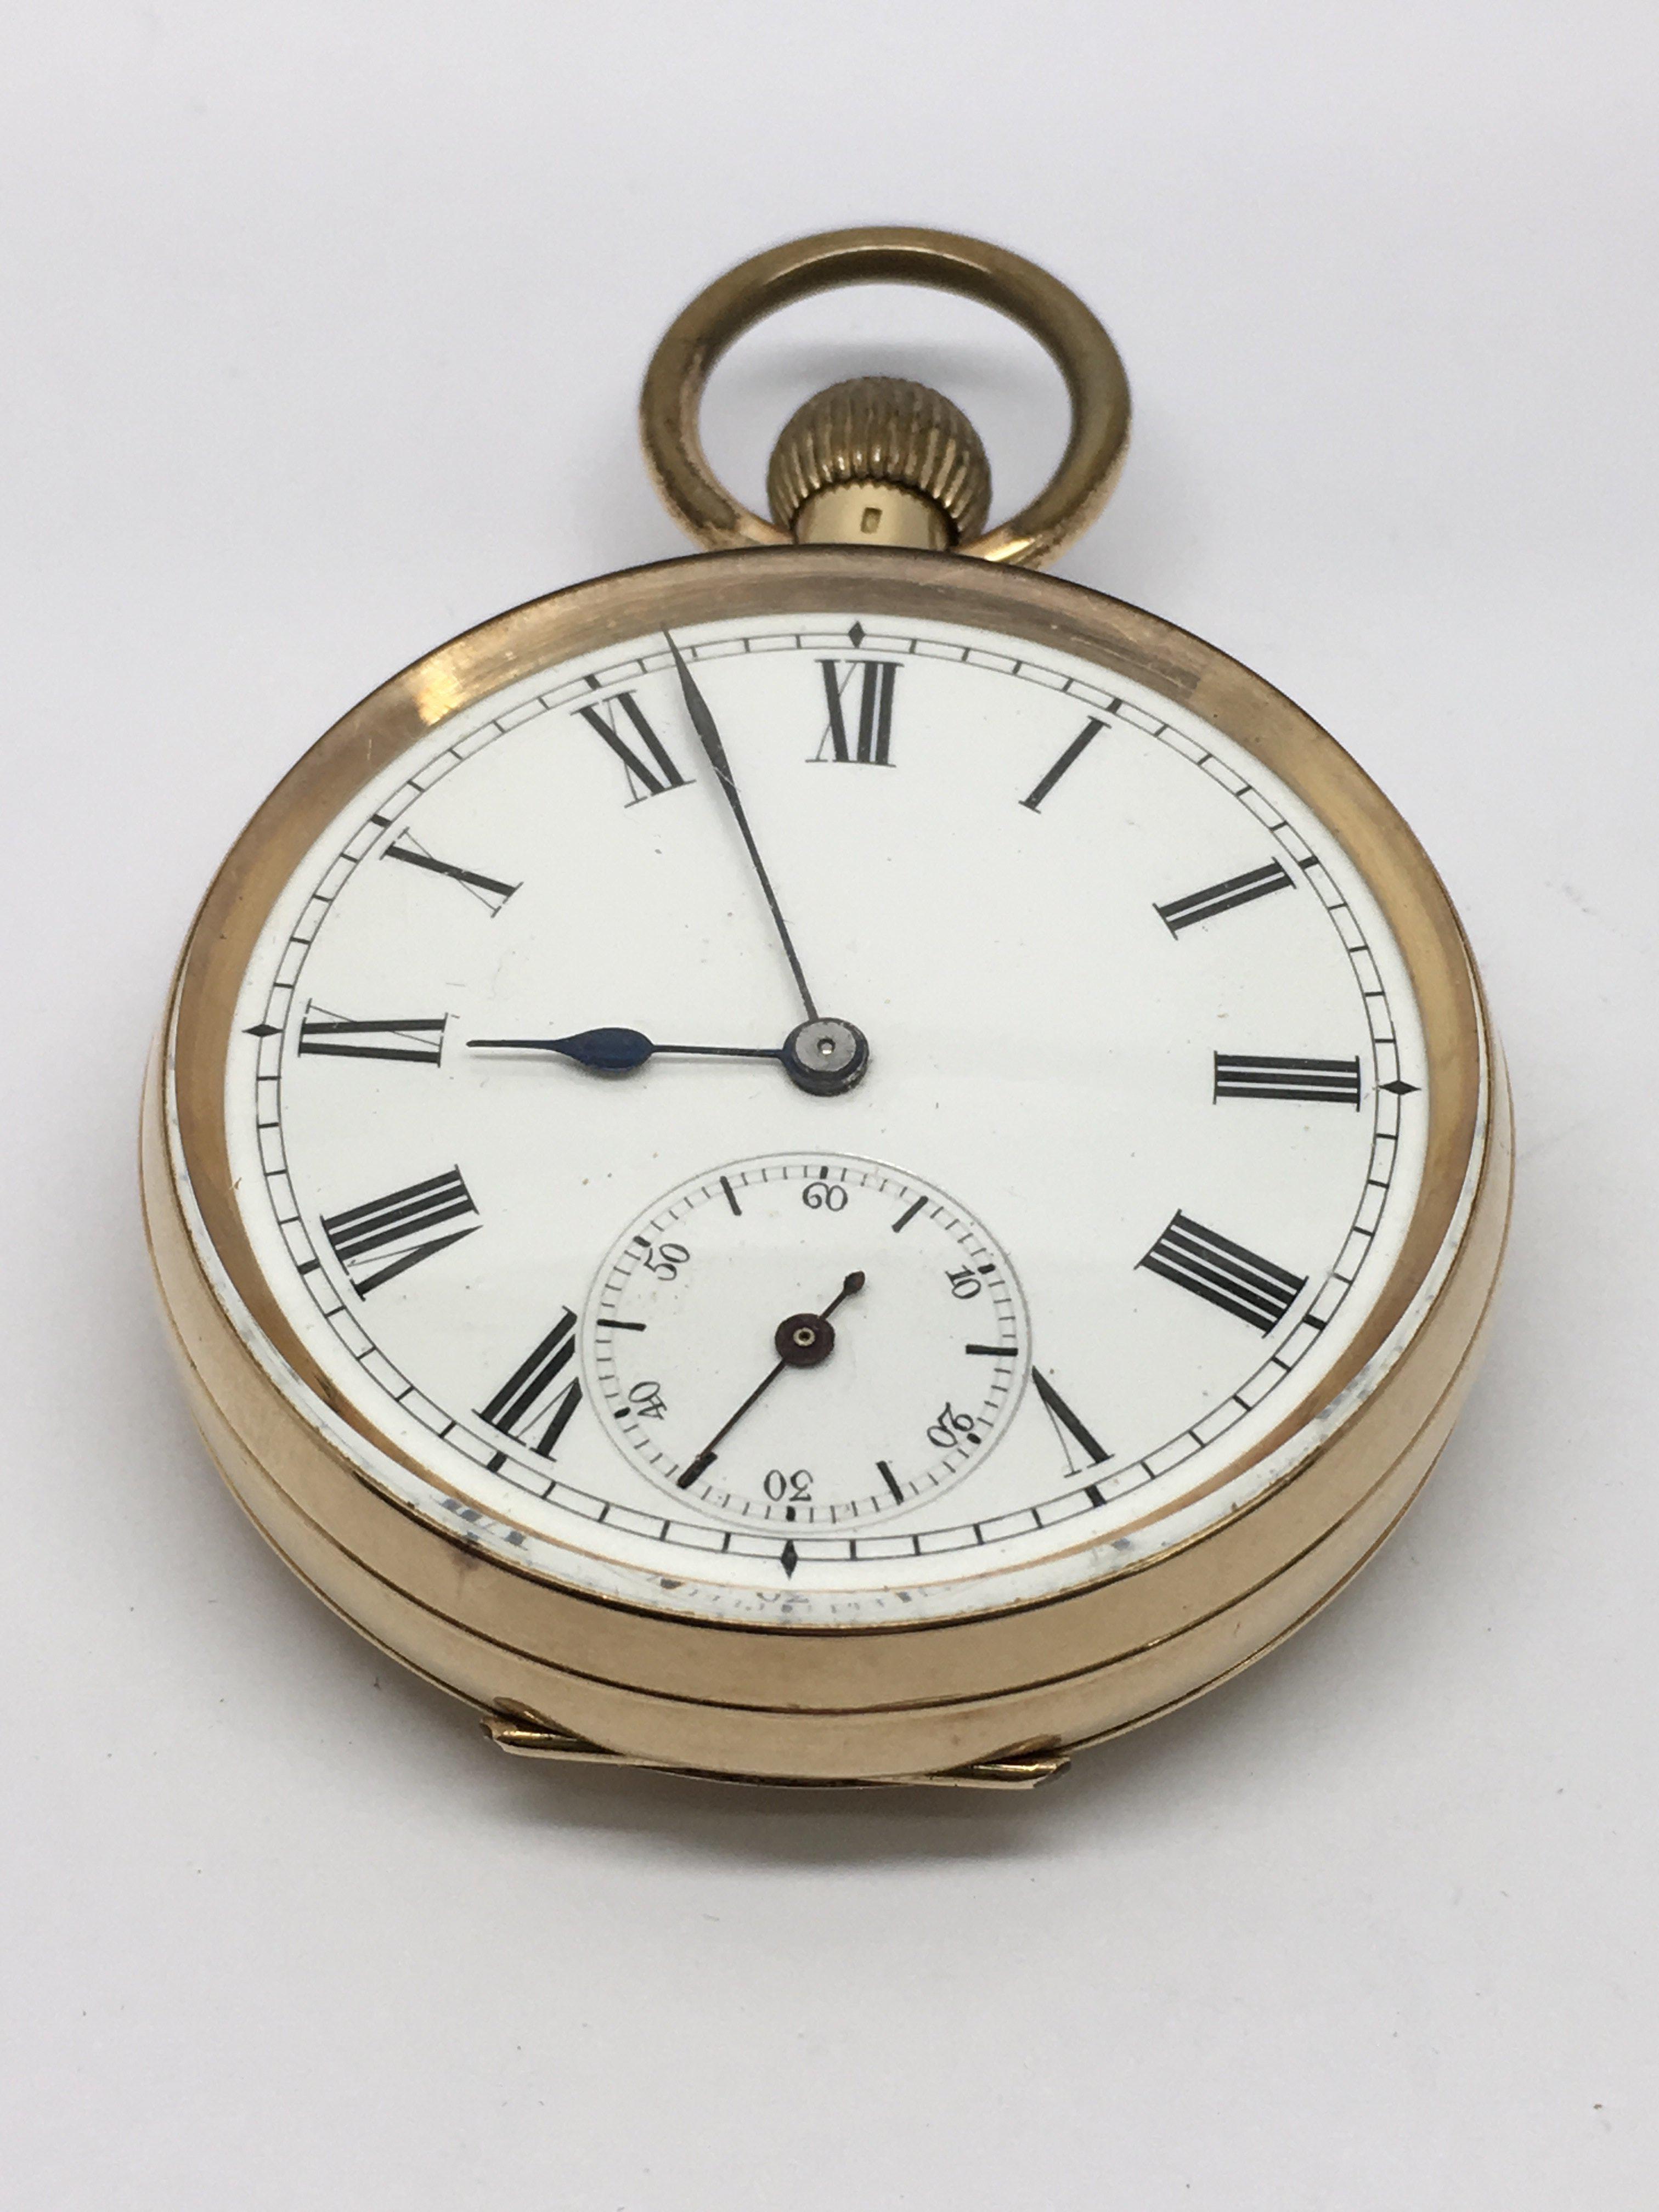 A 14k gold pocket watch with subsidiary dial